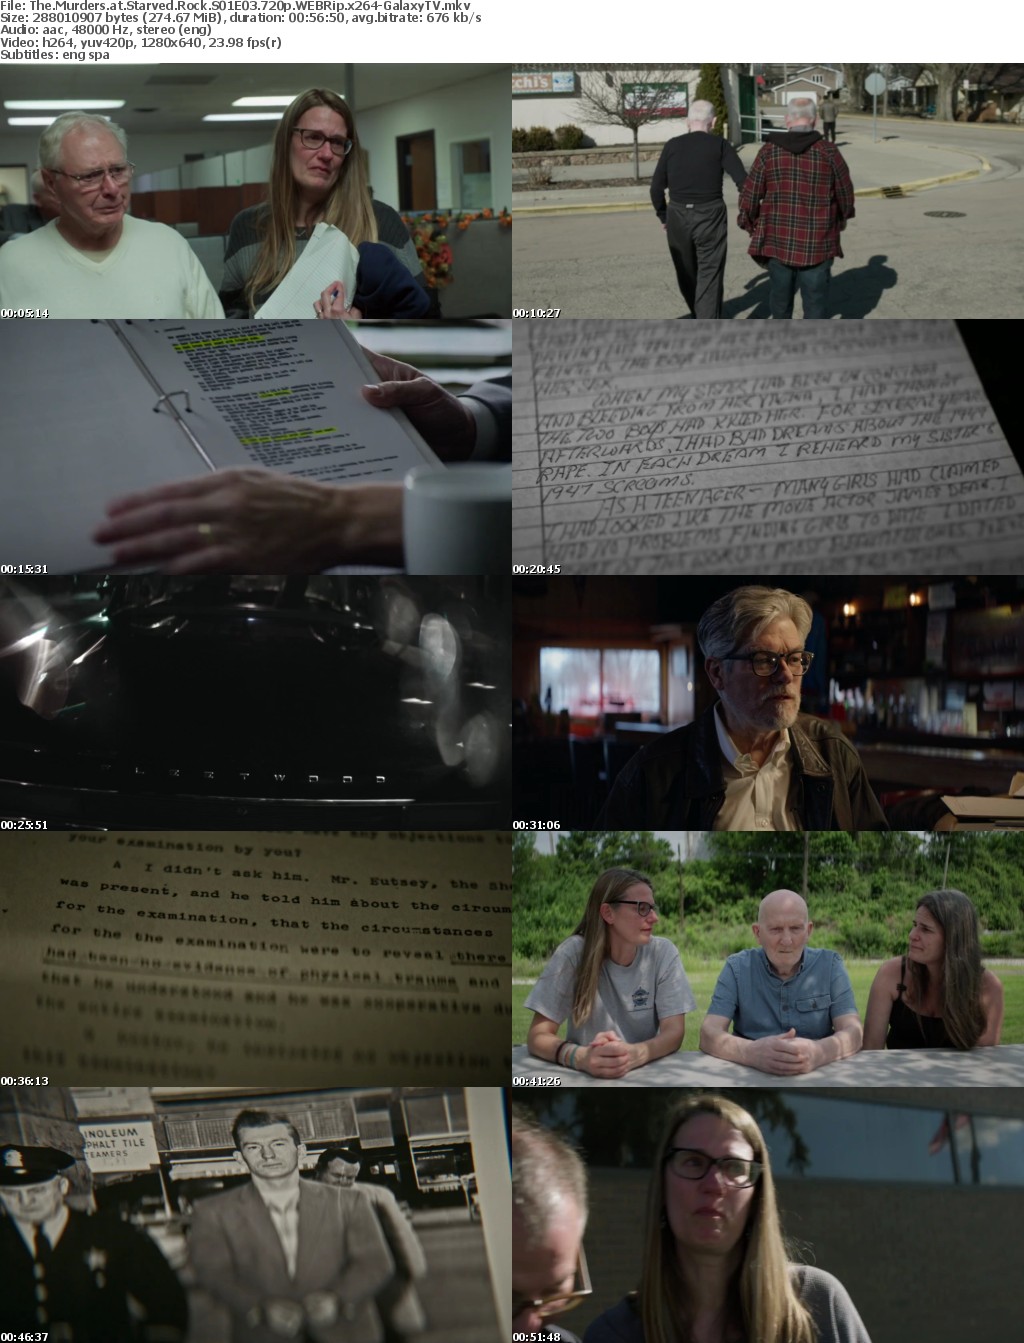 The Murders at Starved Rock S01 COMPLETE 720p WEBRip x264-GalaxyTV